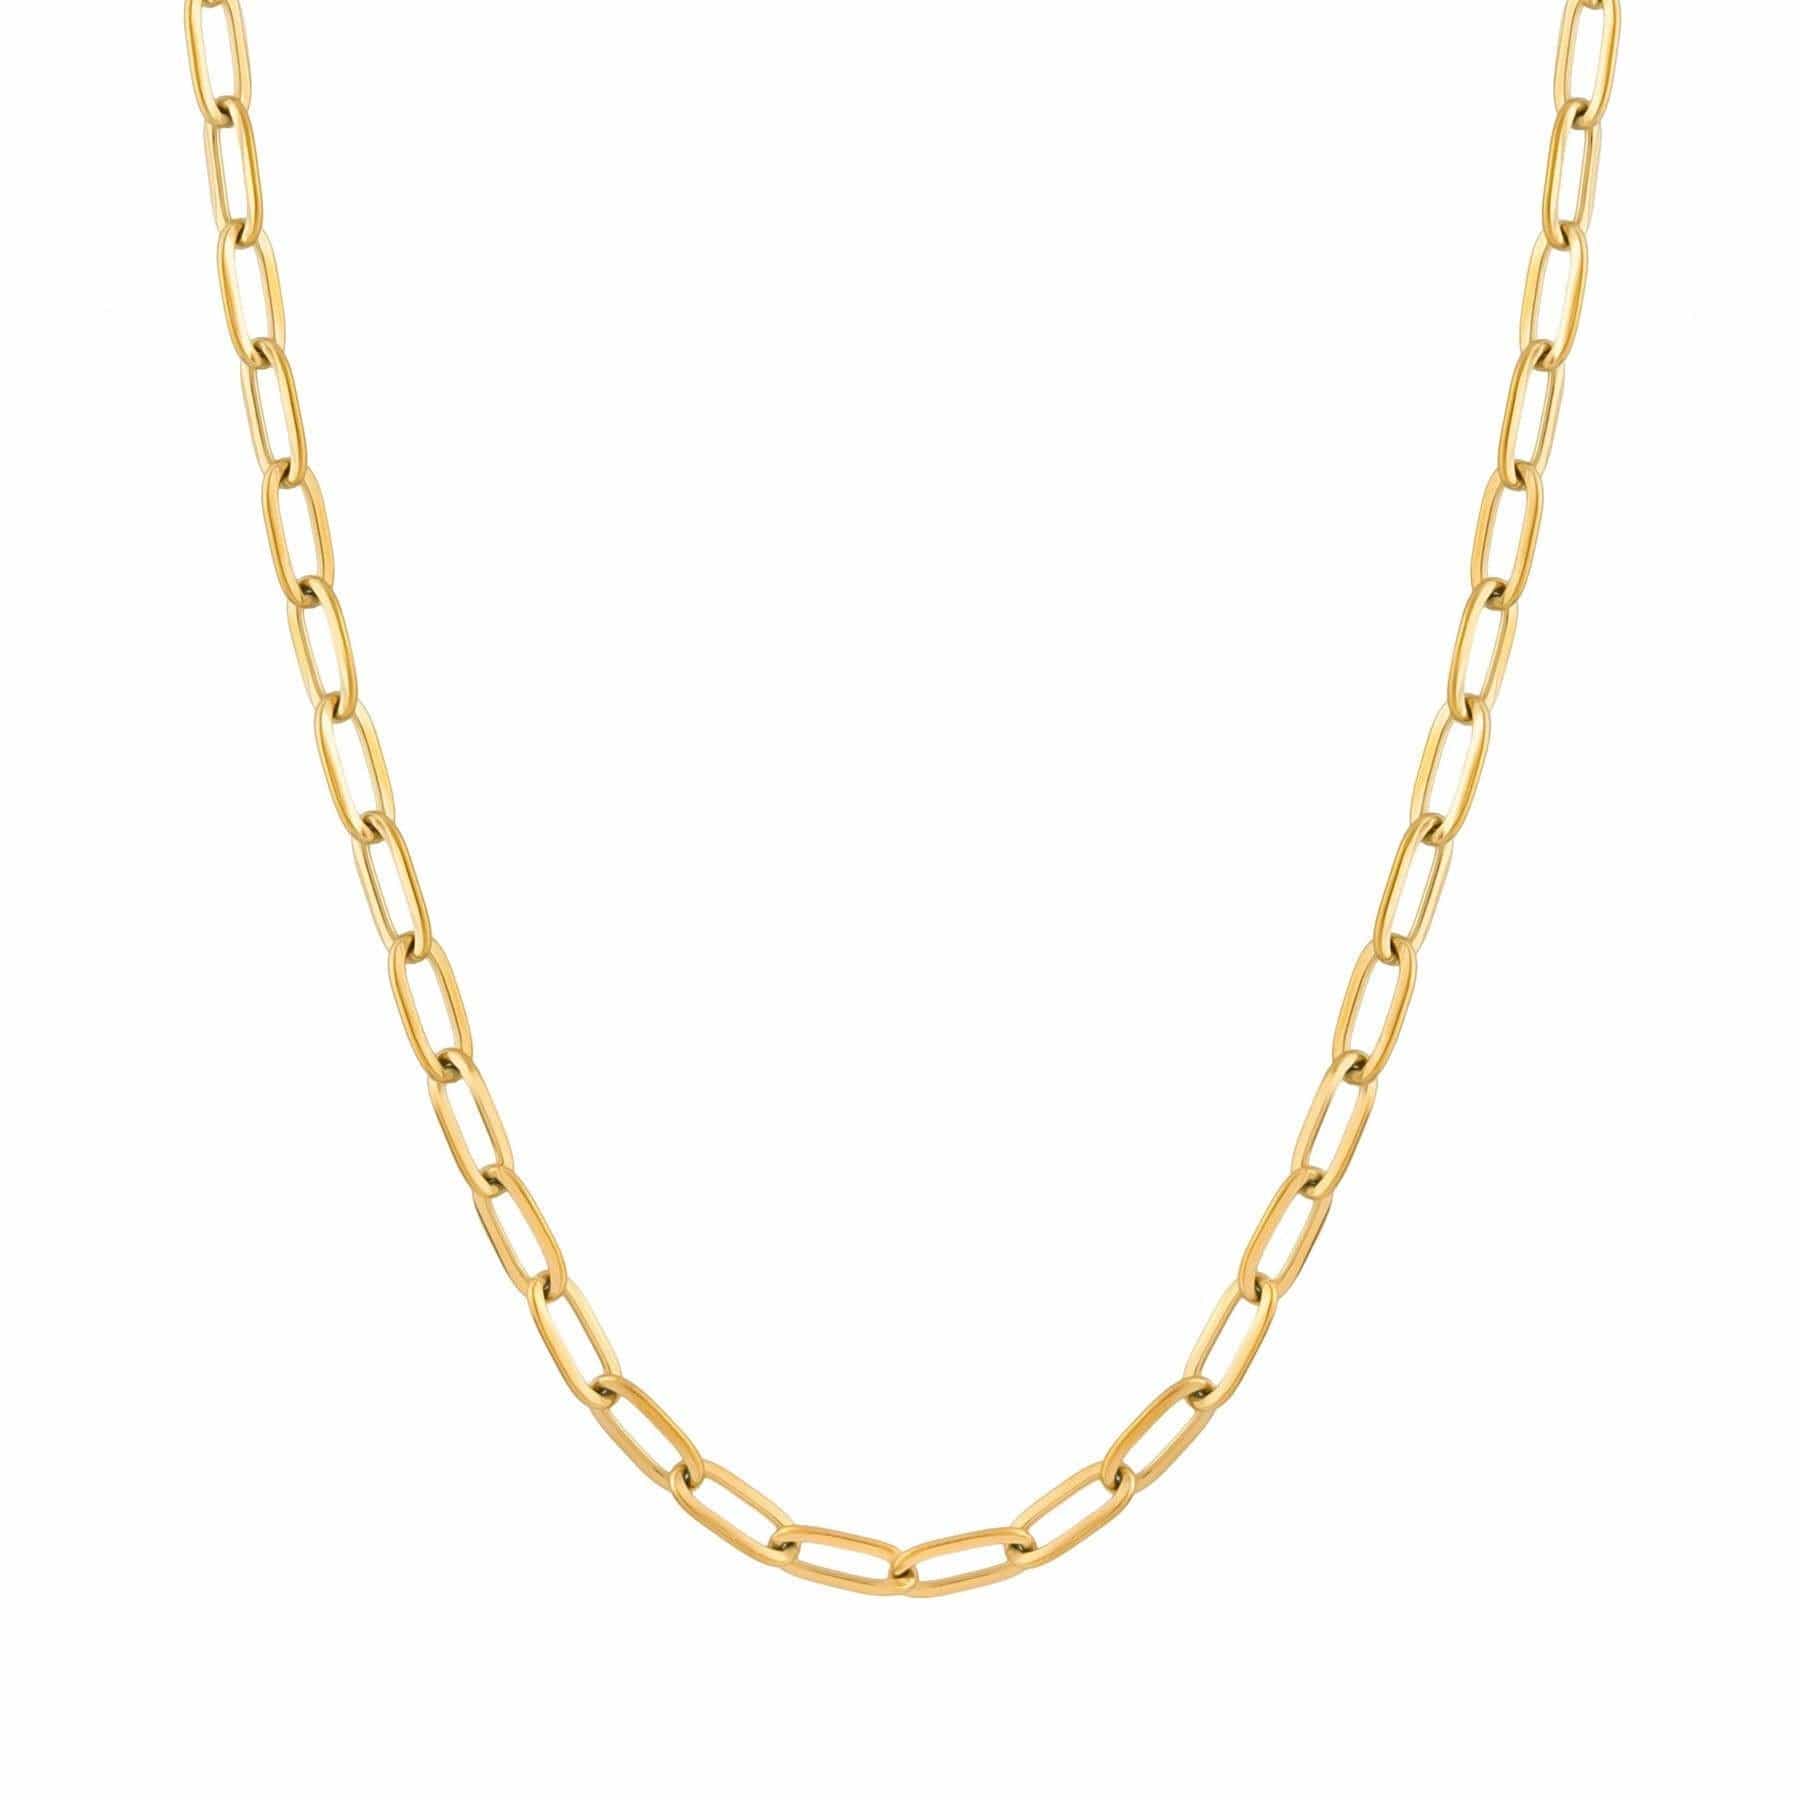 BohoMoon Stainless Steel Aida Necklace Gold